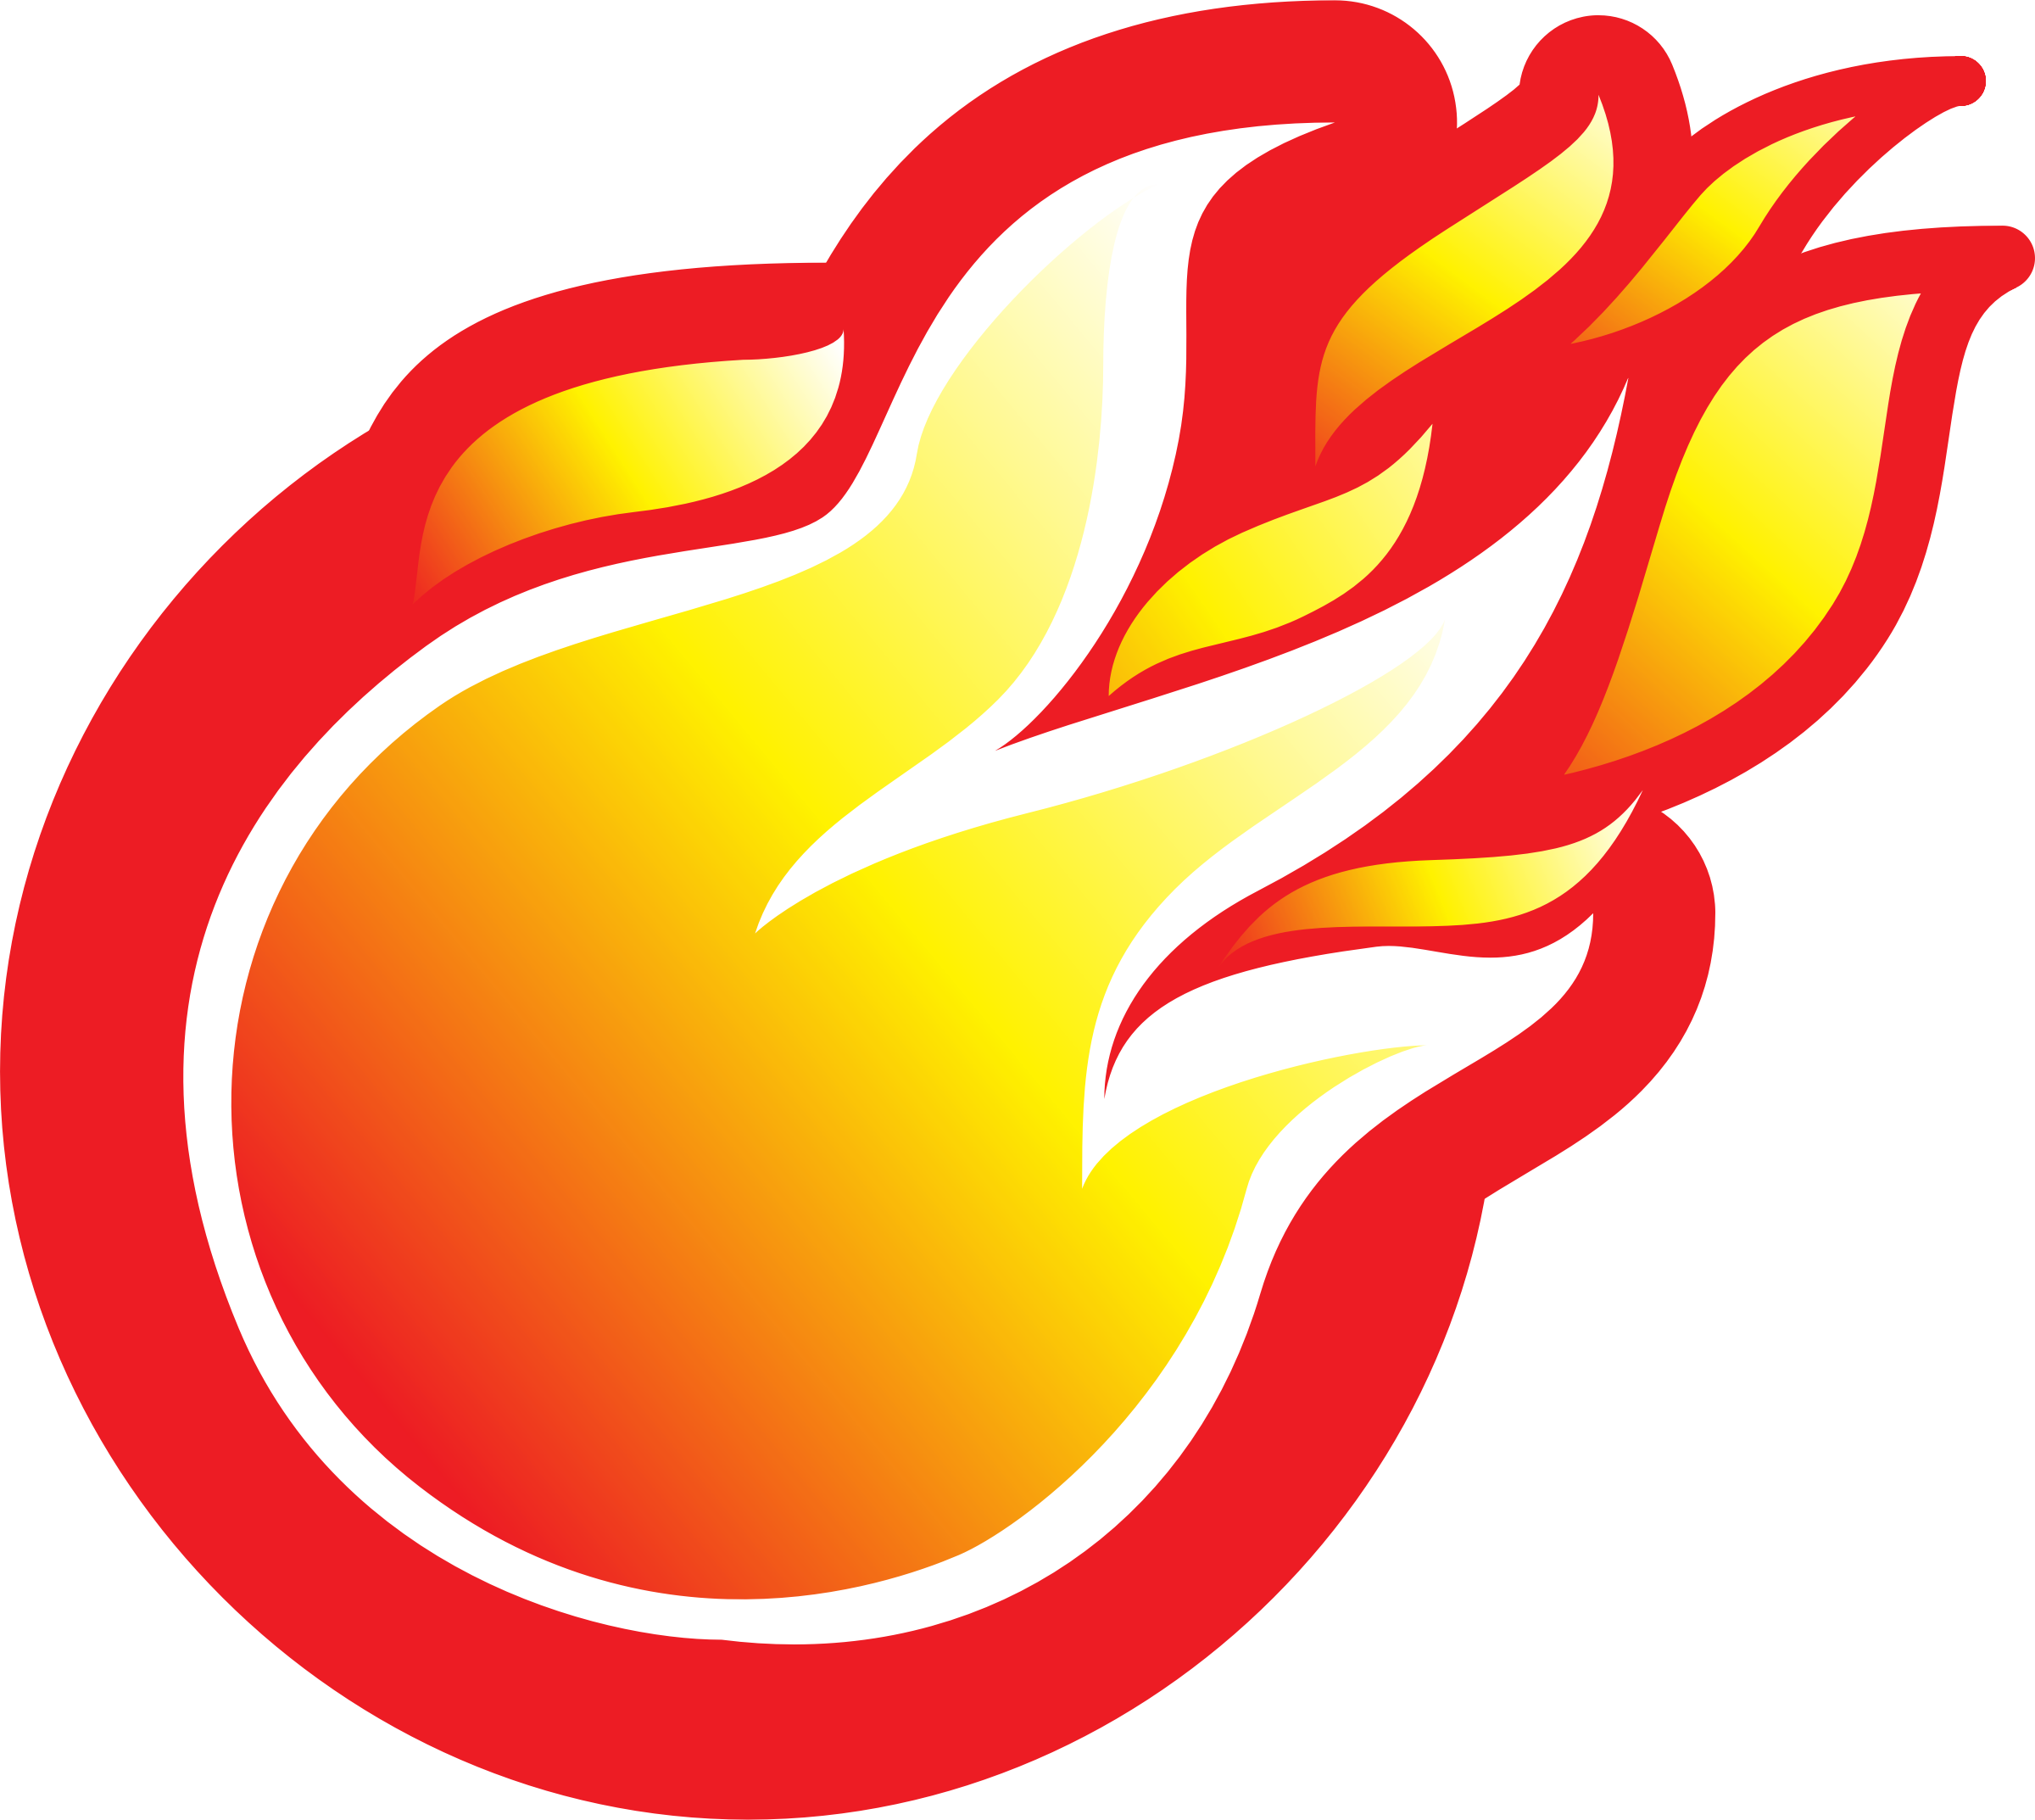 Fire flame clip art free vector for free download about free 3 5.